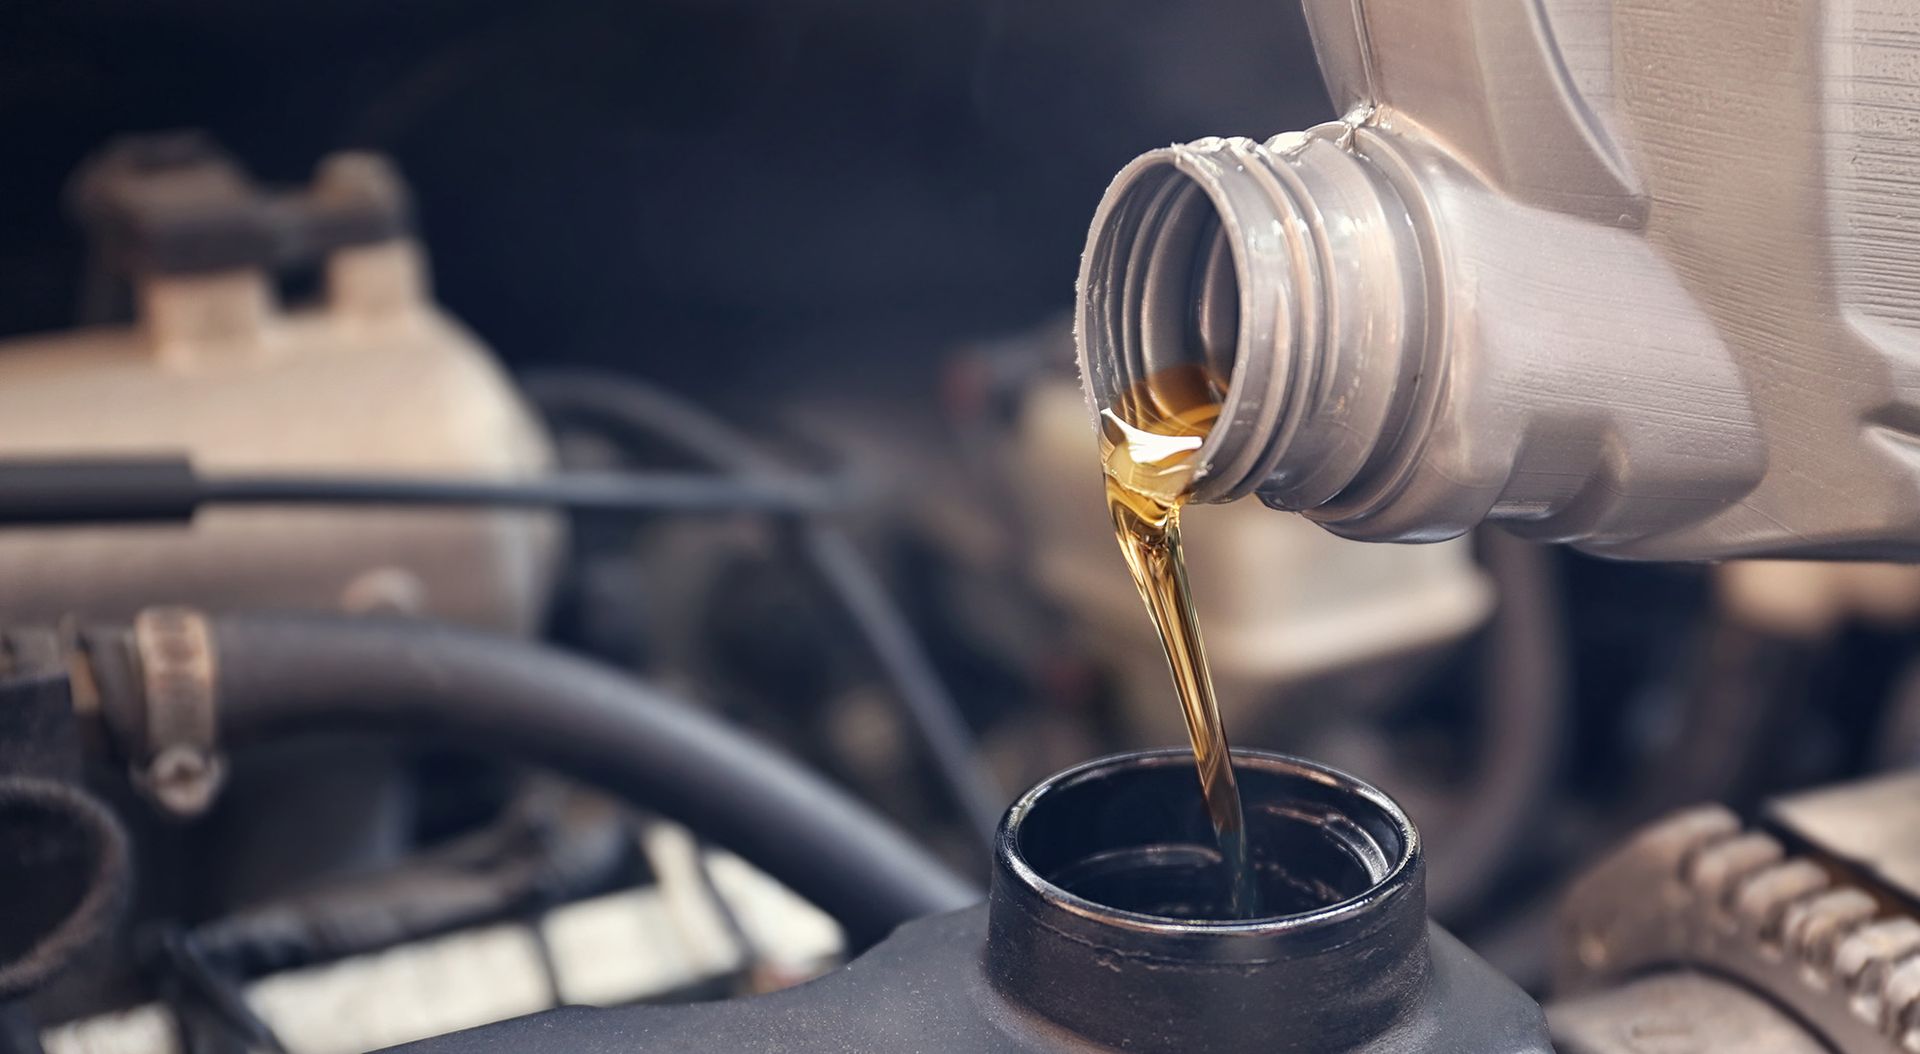 A bottle of oil is being poured into a car engine.